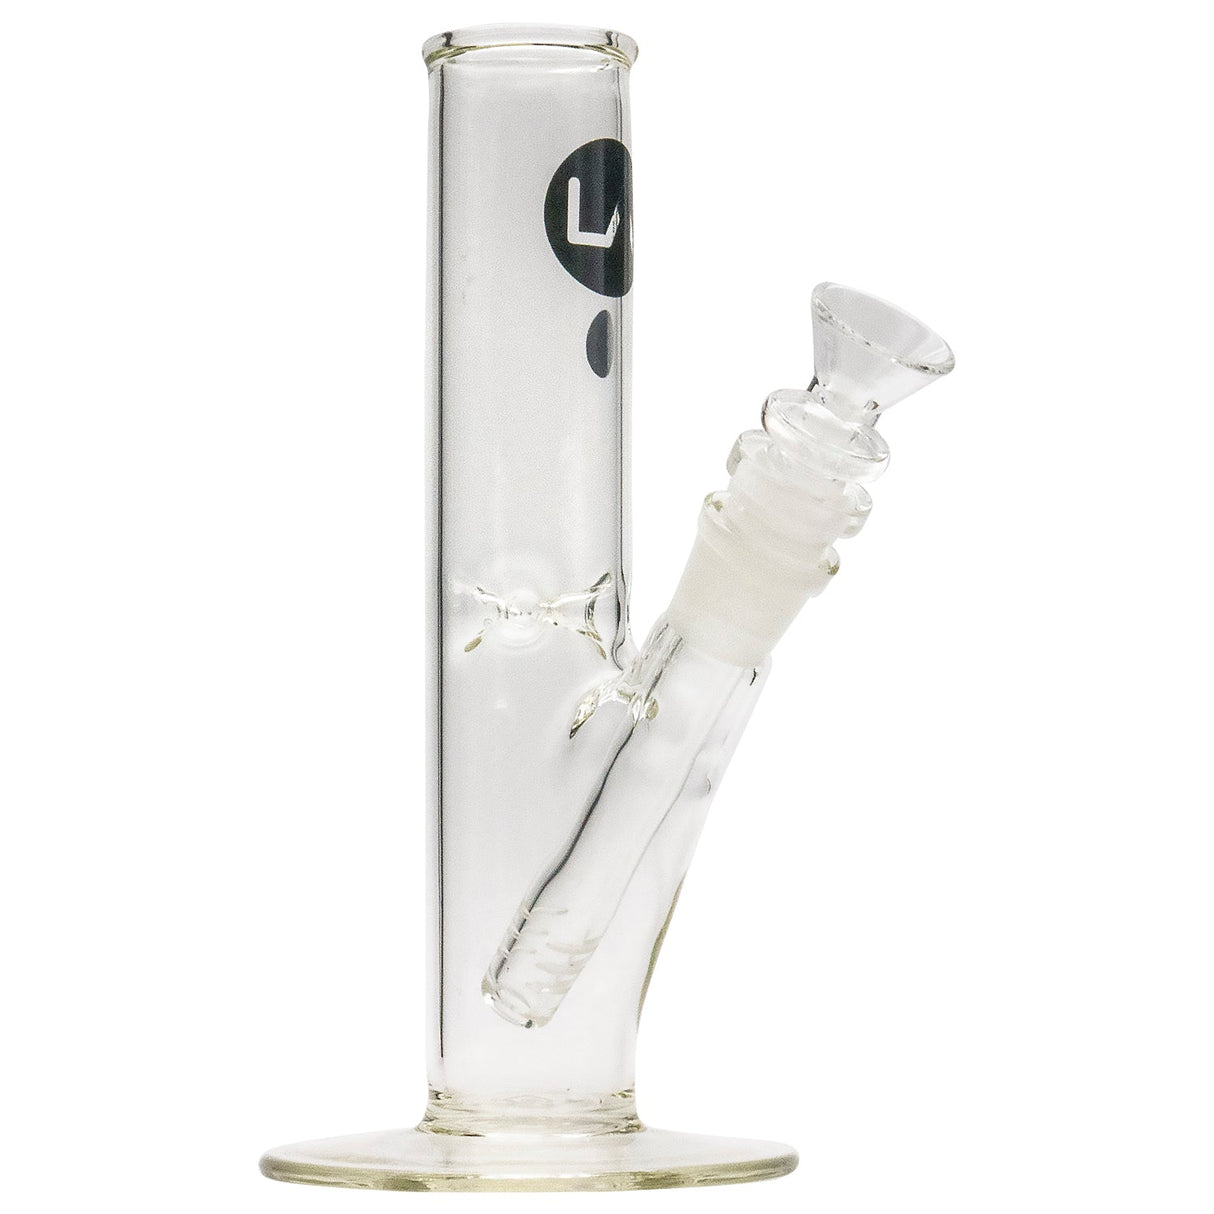 LA Pipes 8" Straight Bong with Ice Pinch, 45 Degree Joint, Clear Borosilicate Glass, Front View